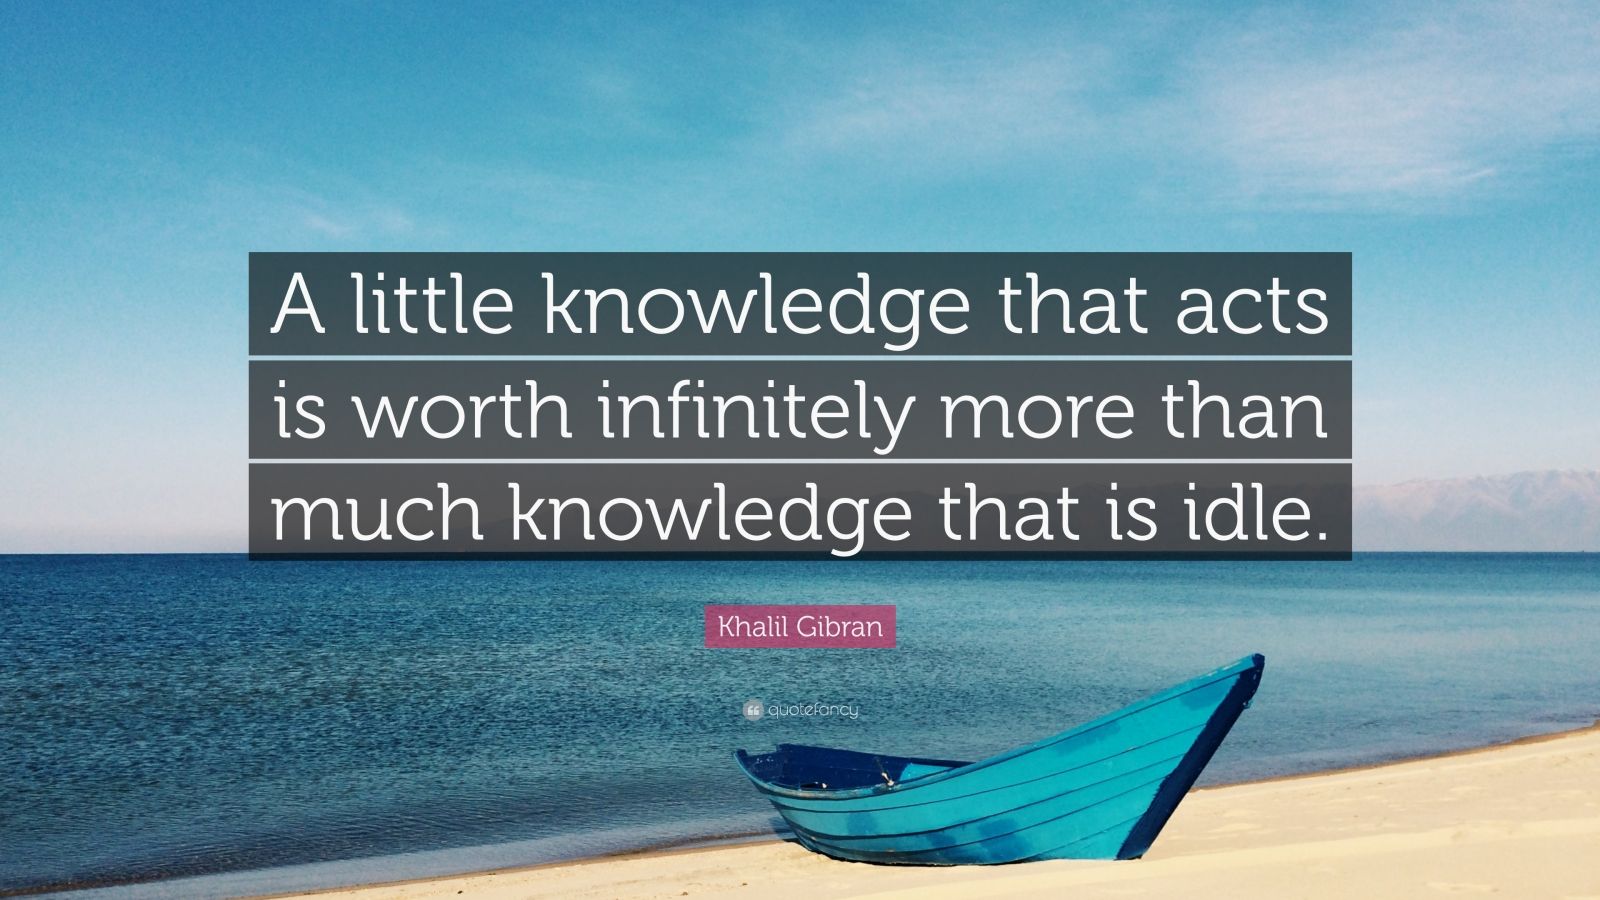 Khalil Gibran Quote: “A little knowledge that acts is worth infinitely ...